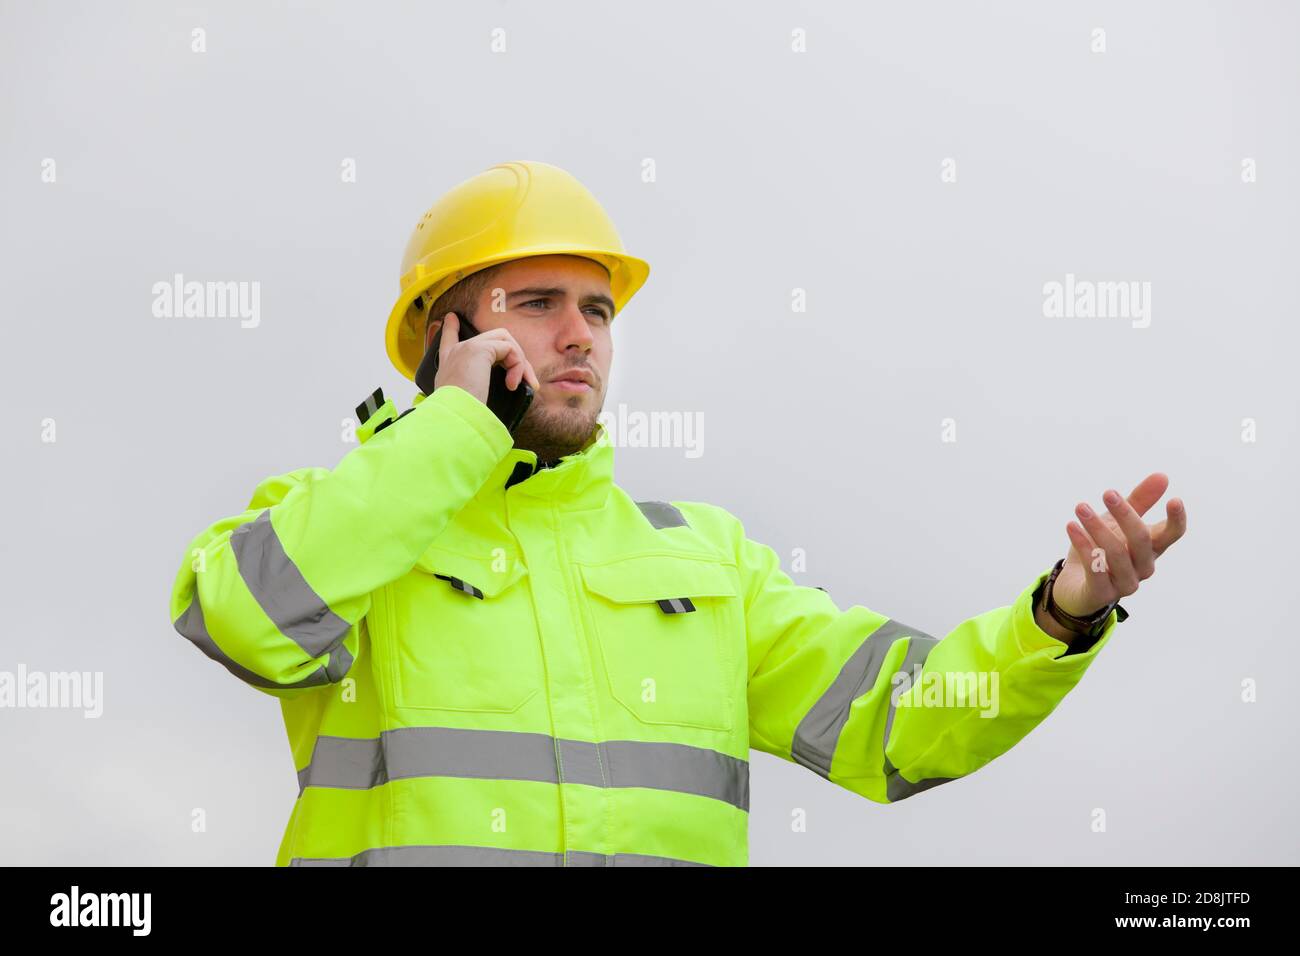 Young engineer or worker with green protective work wear talking on mobile phone in front of bright sky Stock Photo